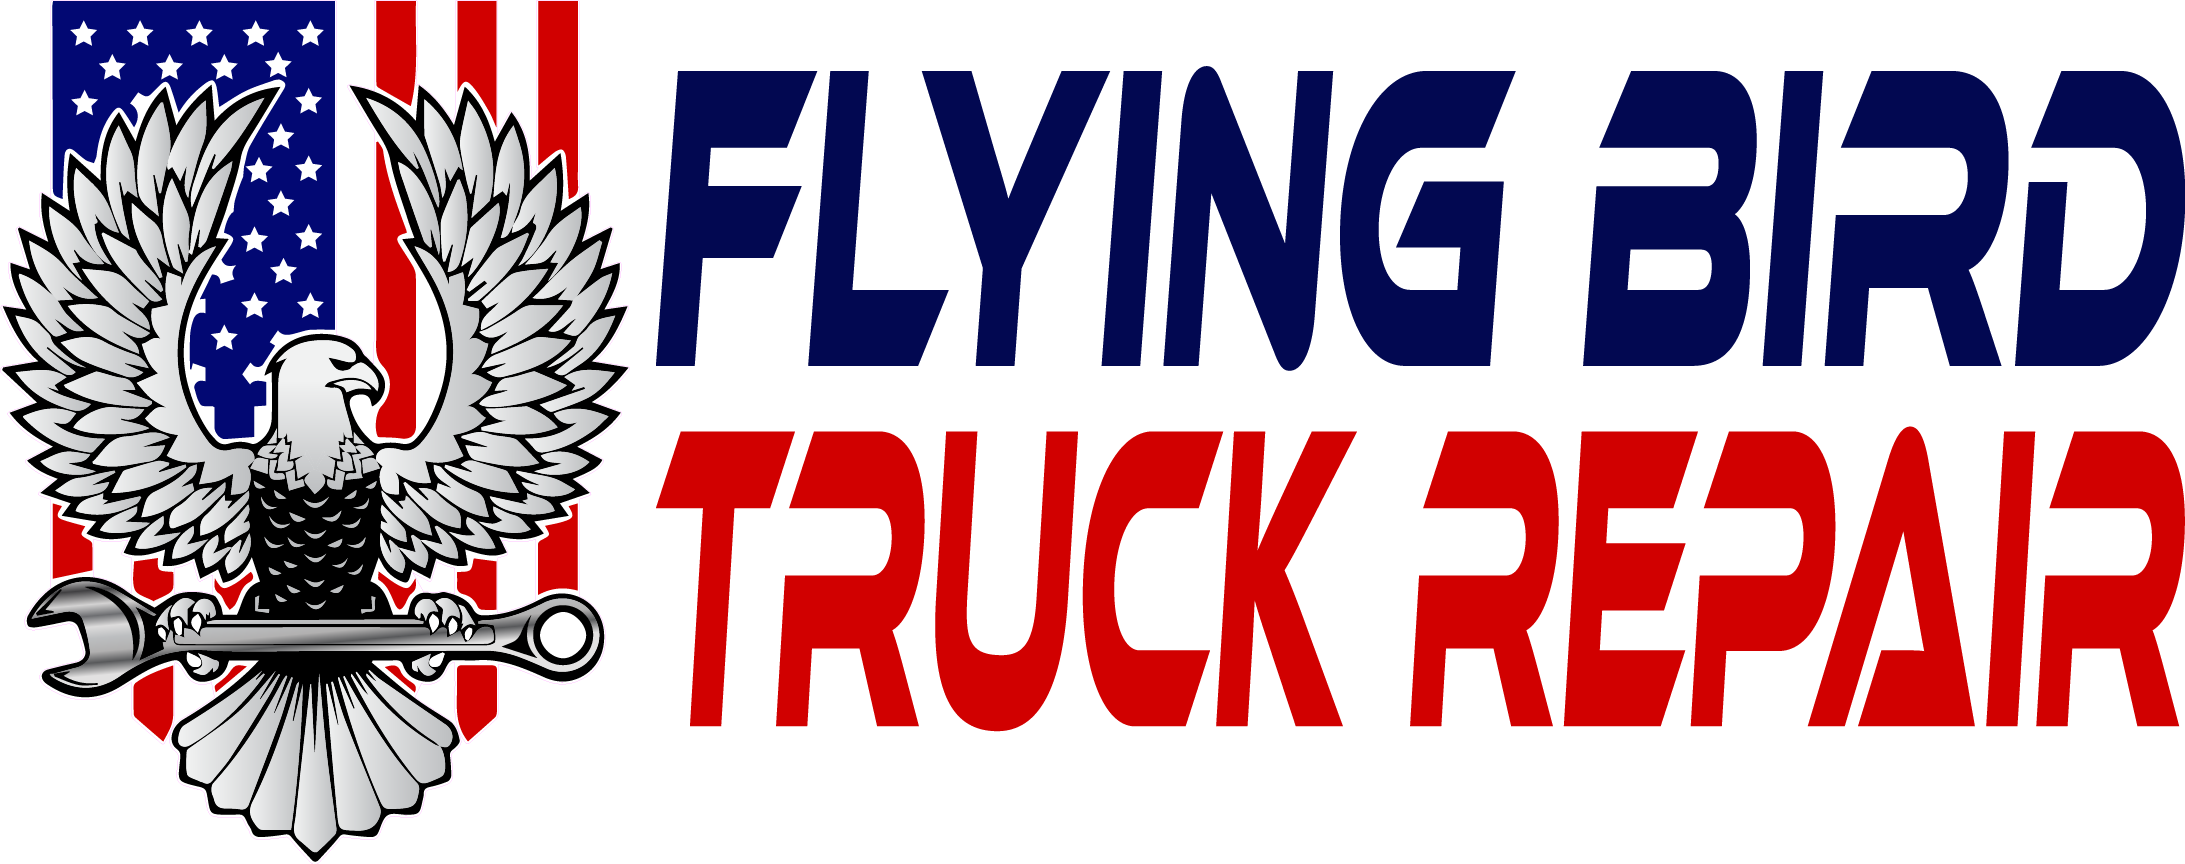 Truck Parking Services Near by | Safe Parking for Trucks